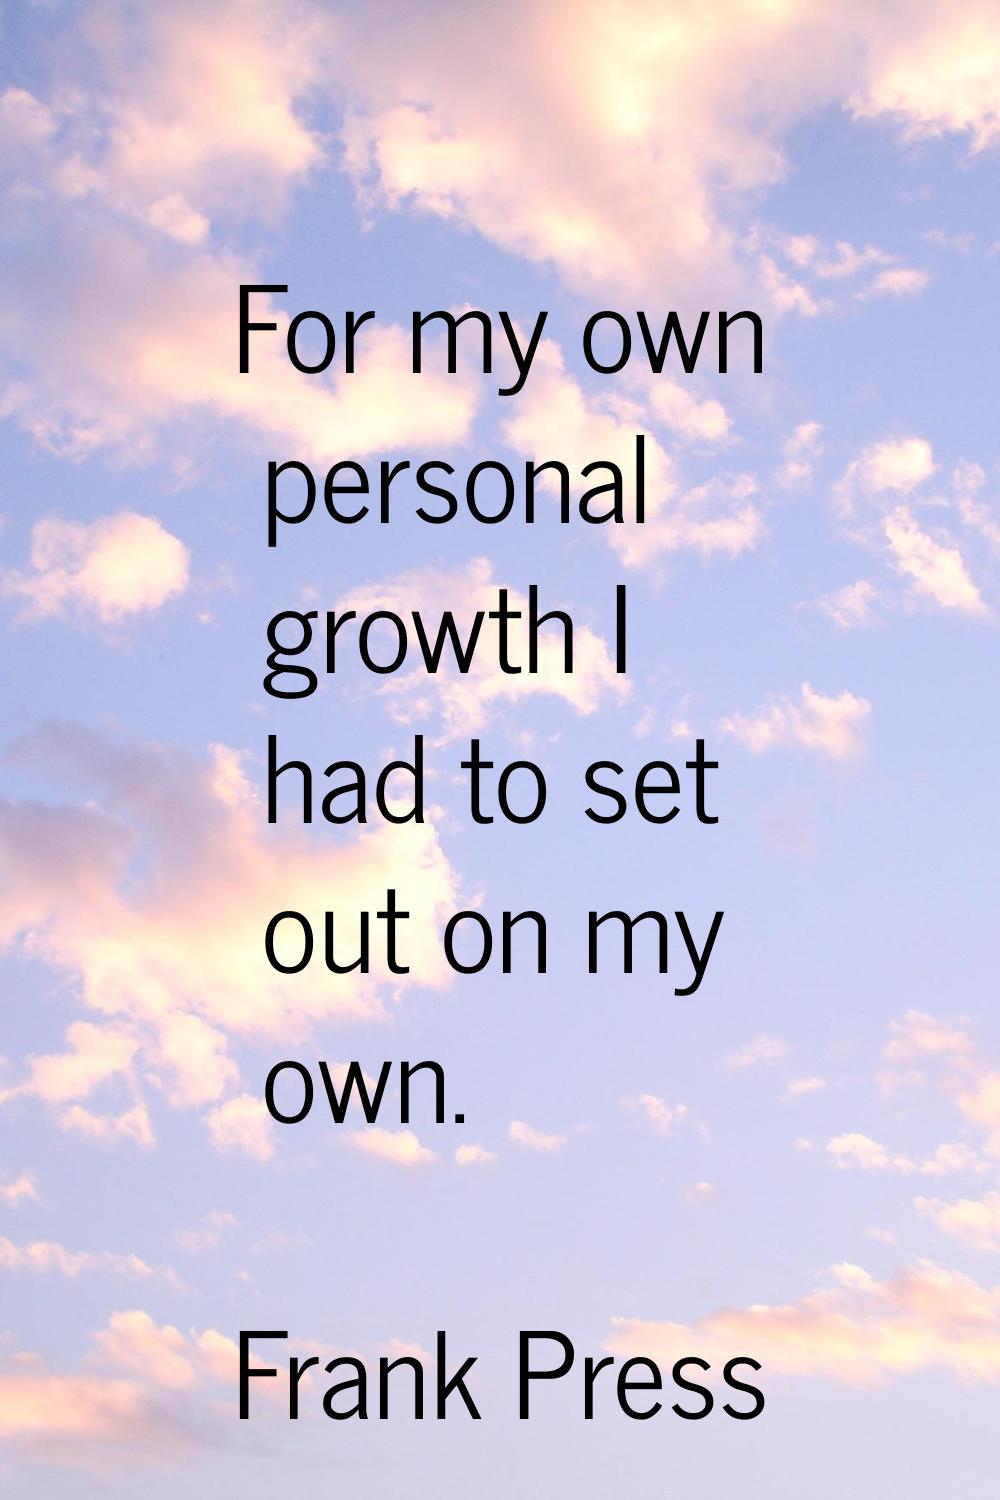 For my own personal growth I had to set out on my own.